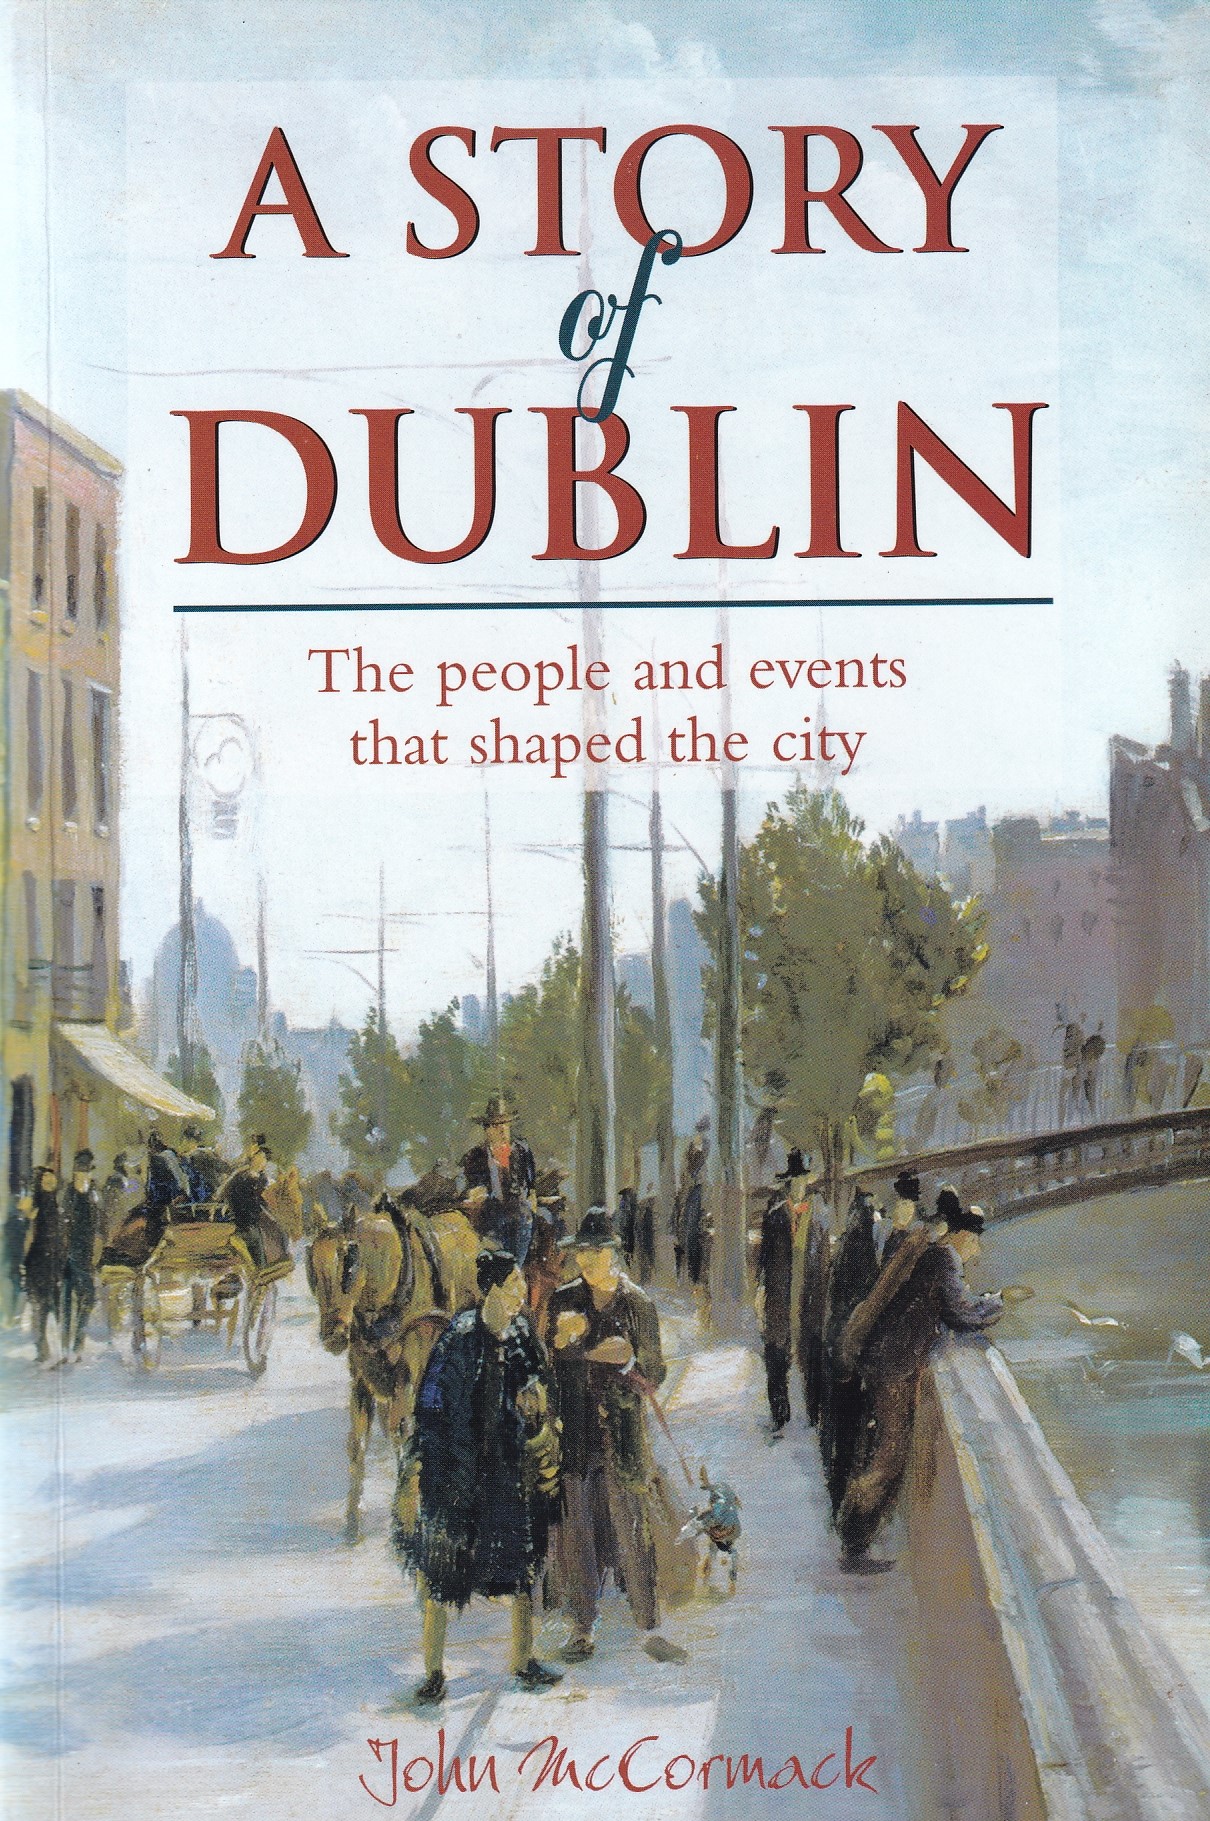 A Story of Dublin: The People and Events That Shaped the City | John McCormack | Charlie Byrne's